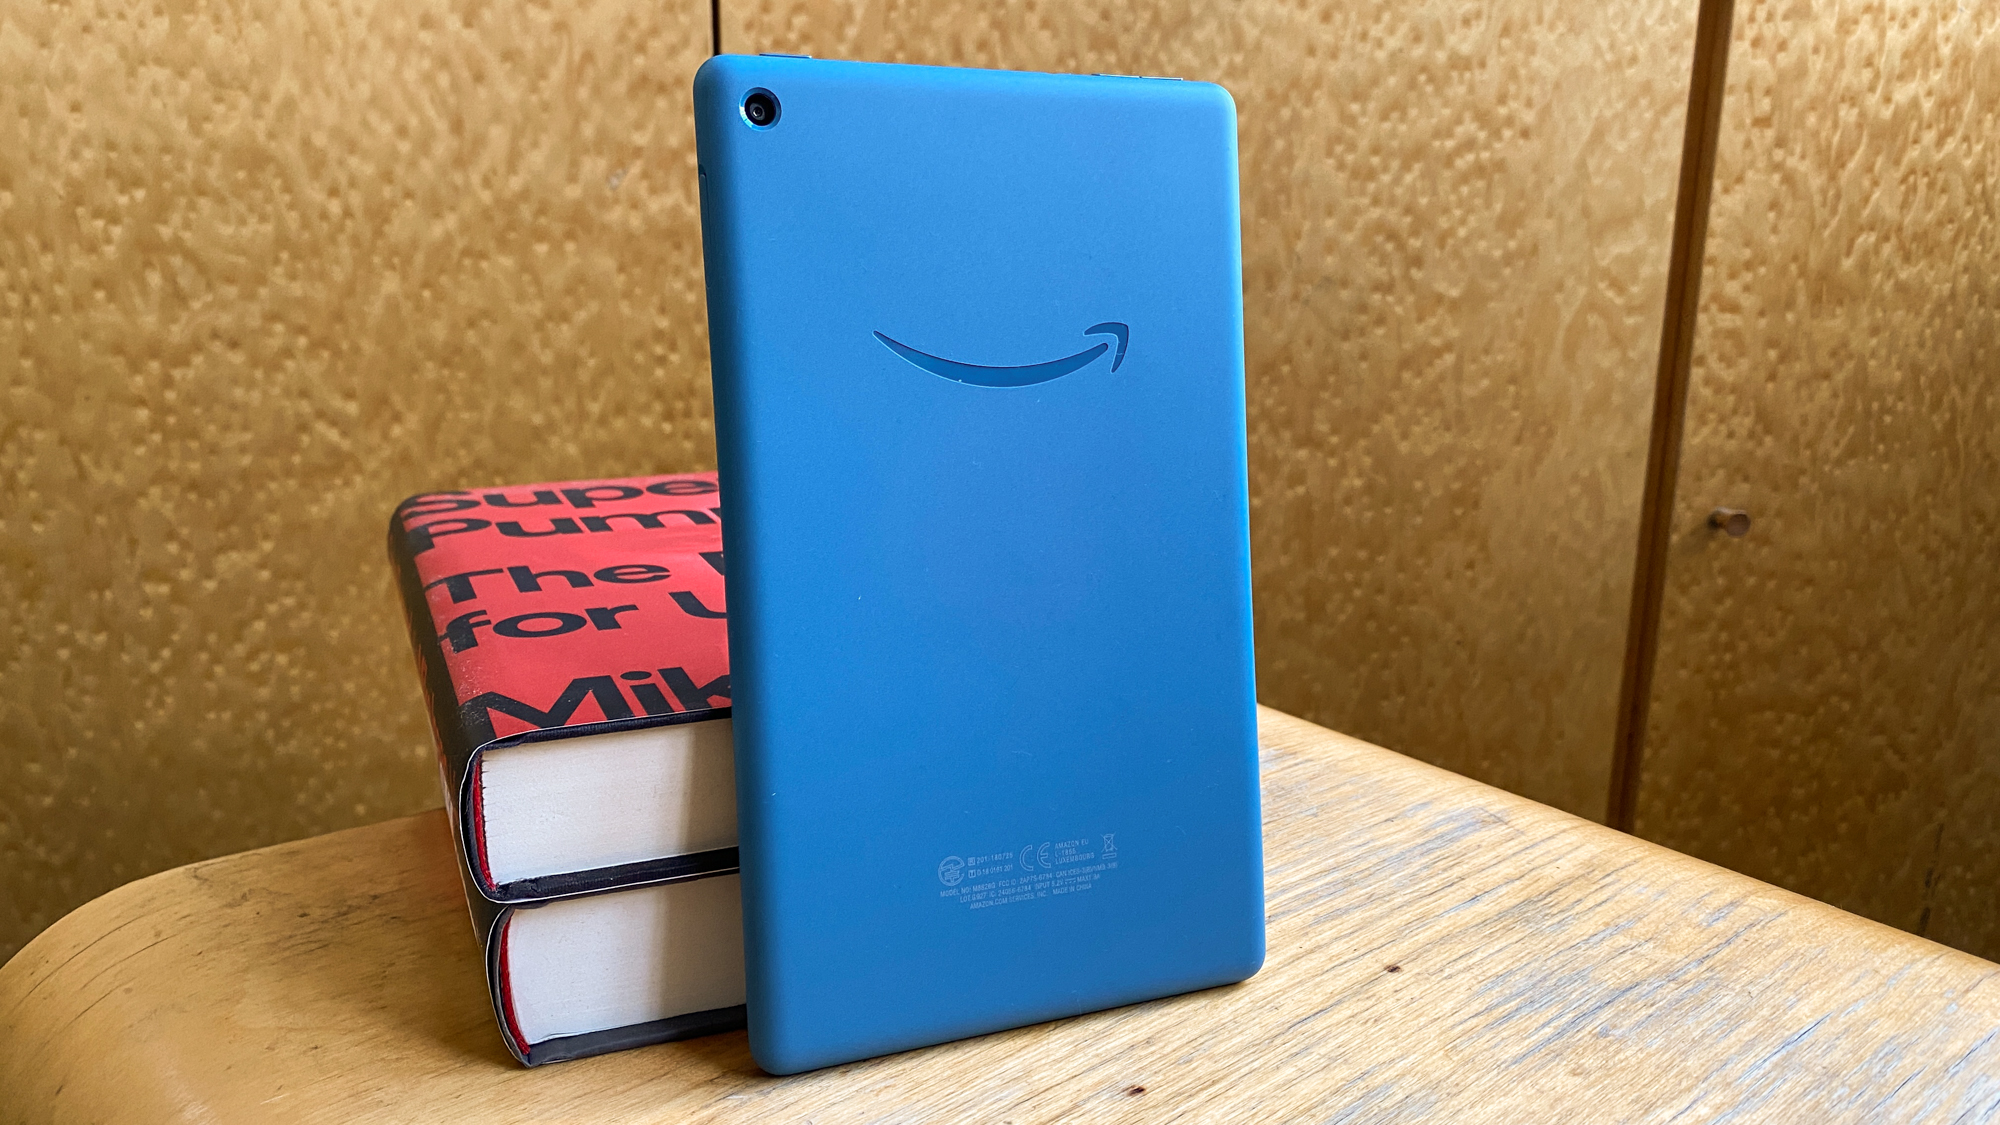 Amazon Fire 7 Review - back